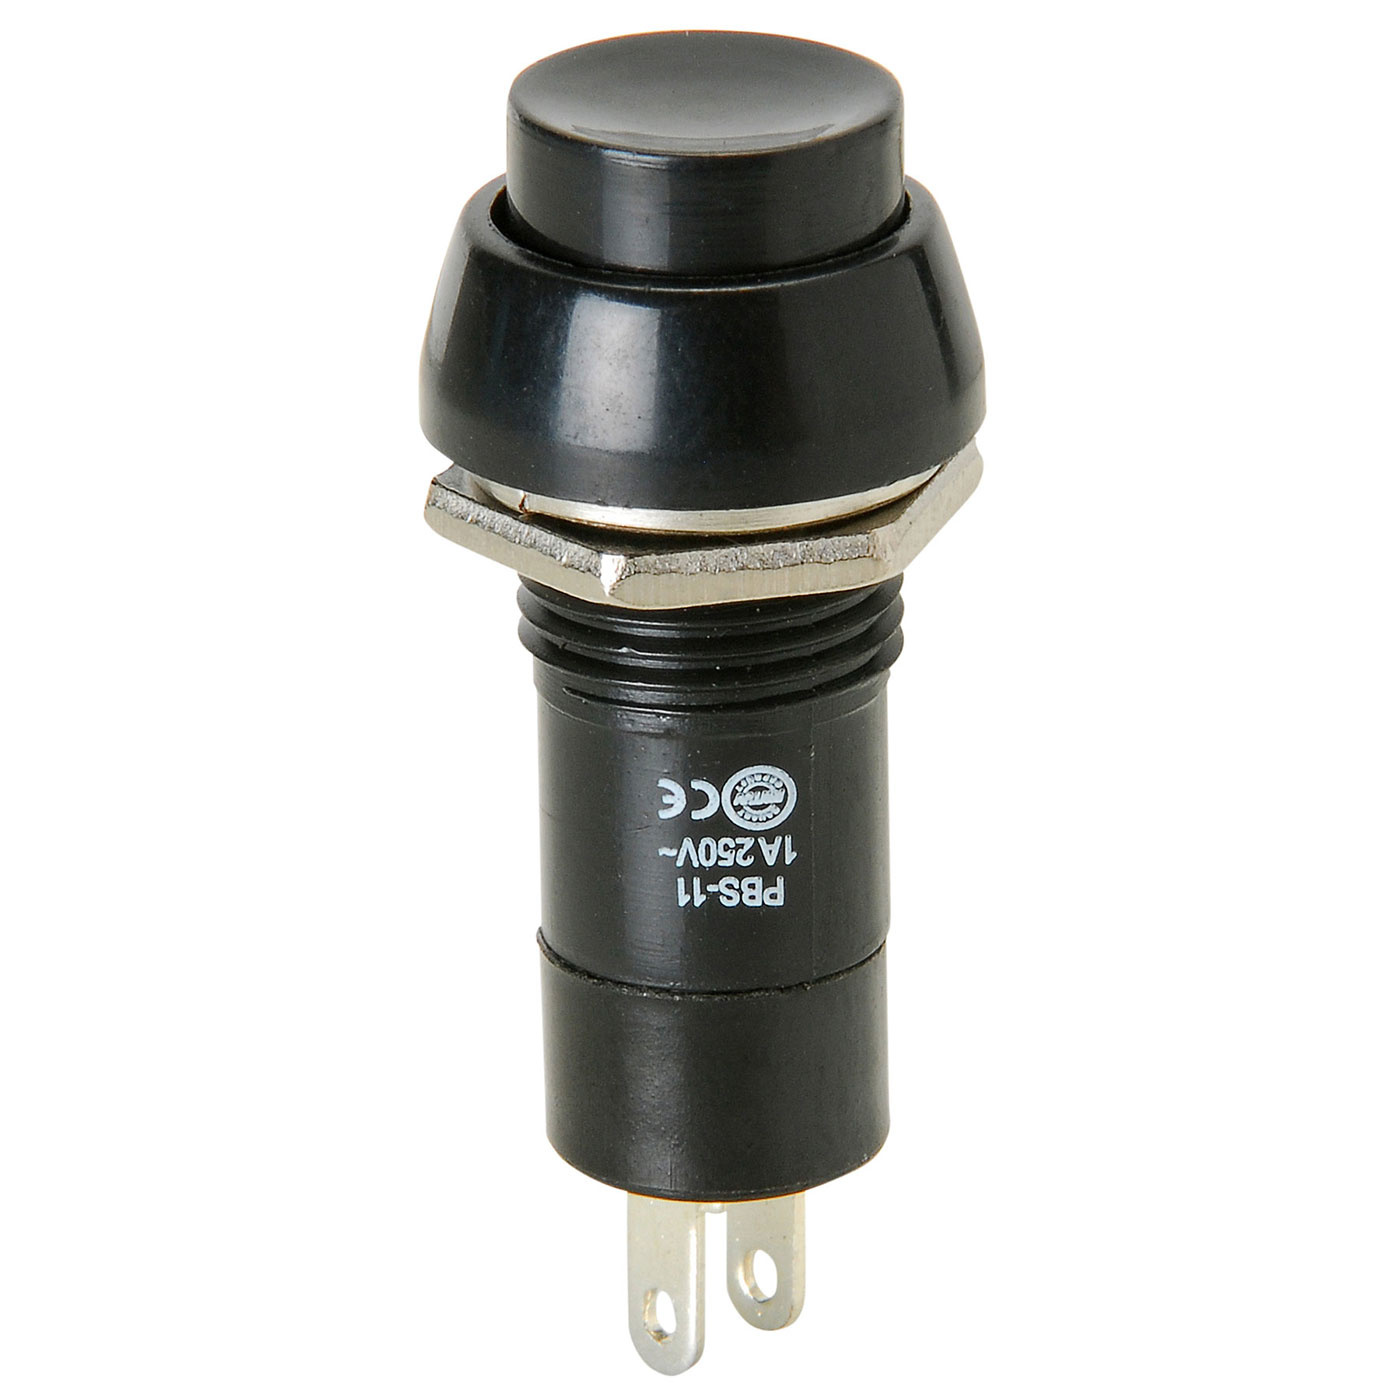 SPST Black Momentary Push Button Switch 1 Circuit 1A 250V off-on 